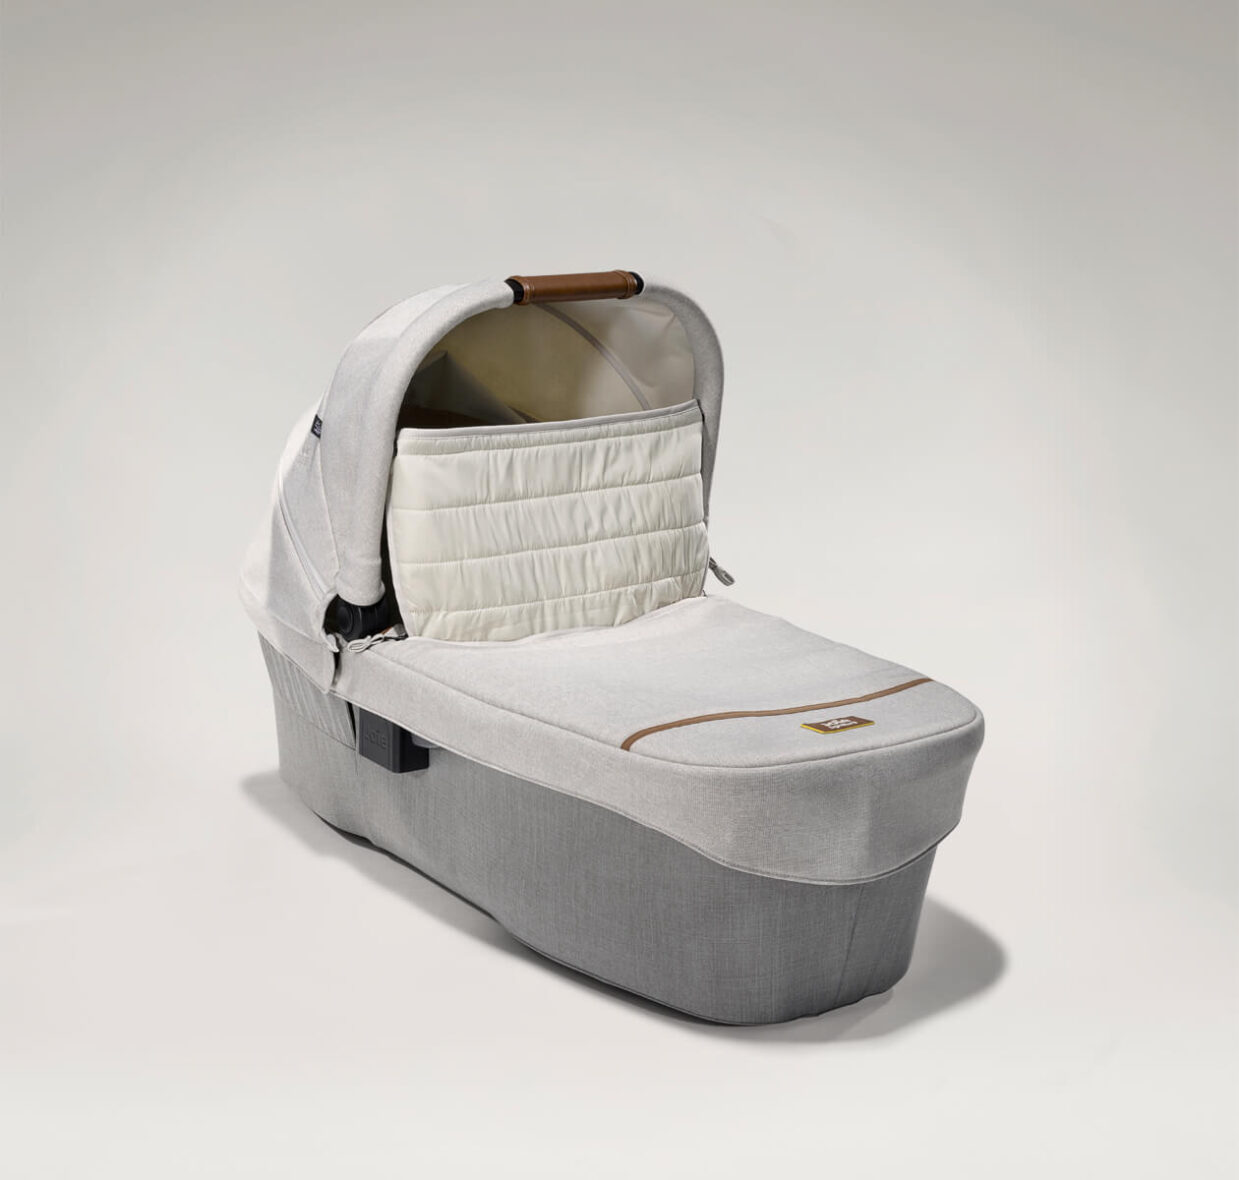 p5-joie-signature-carrycot-ramblexl-oyster-right-angle-windshield